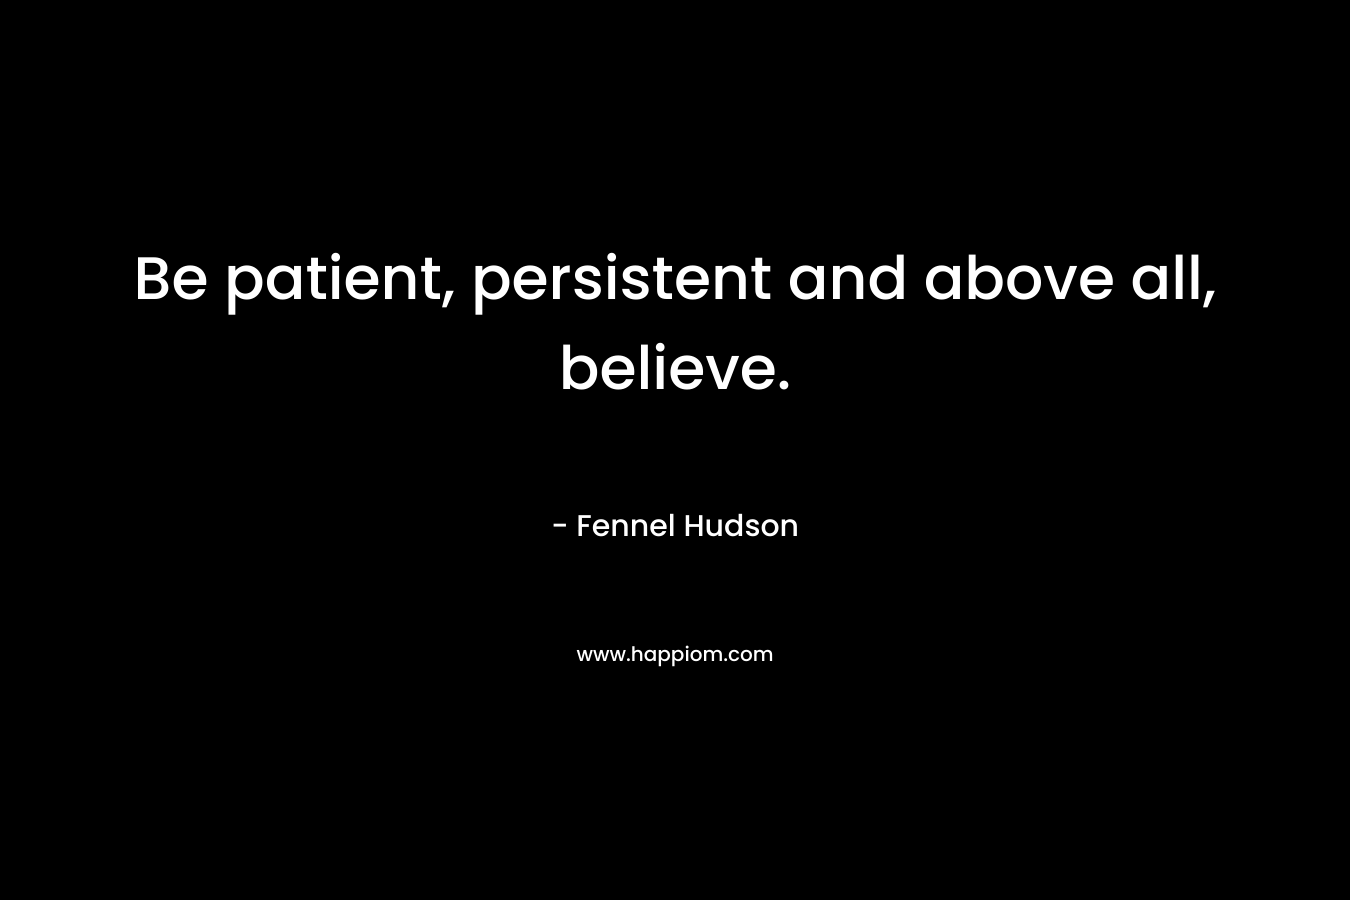 Be patient, persistent and above all, believe. – Fennel Hudson